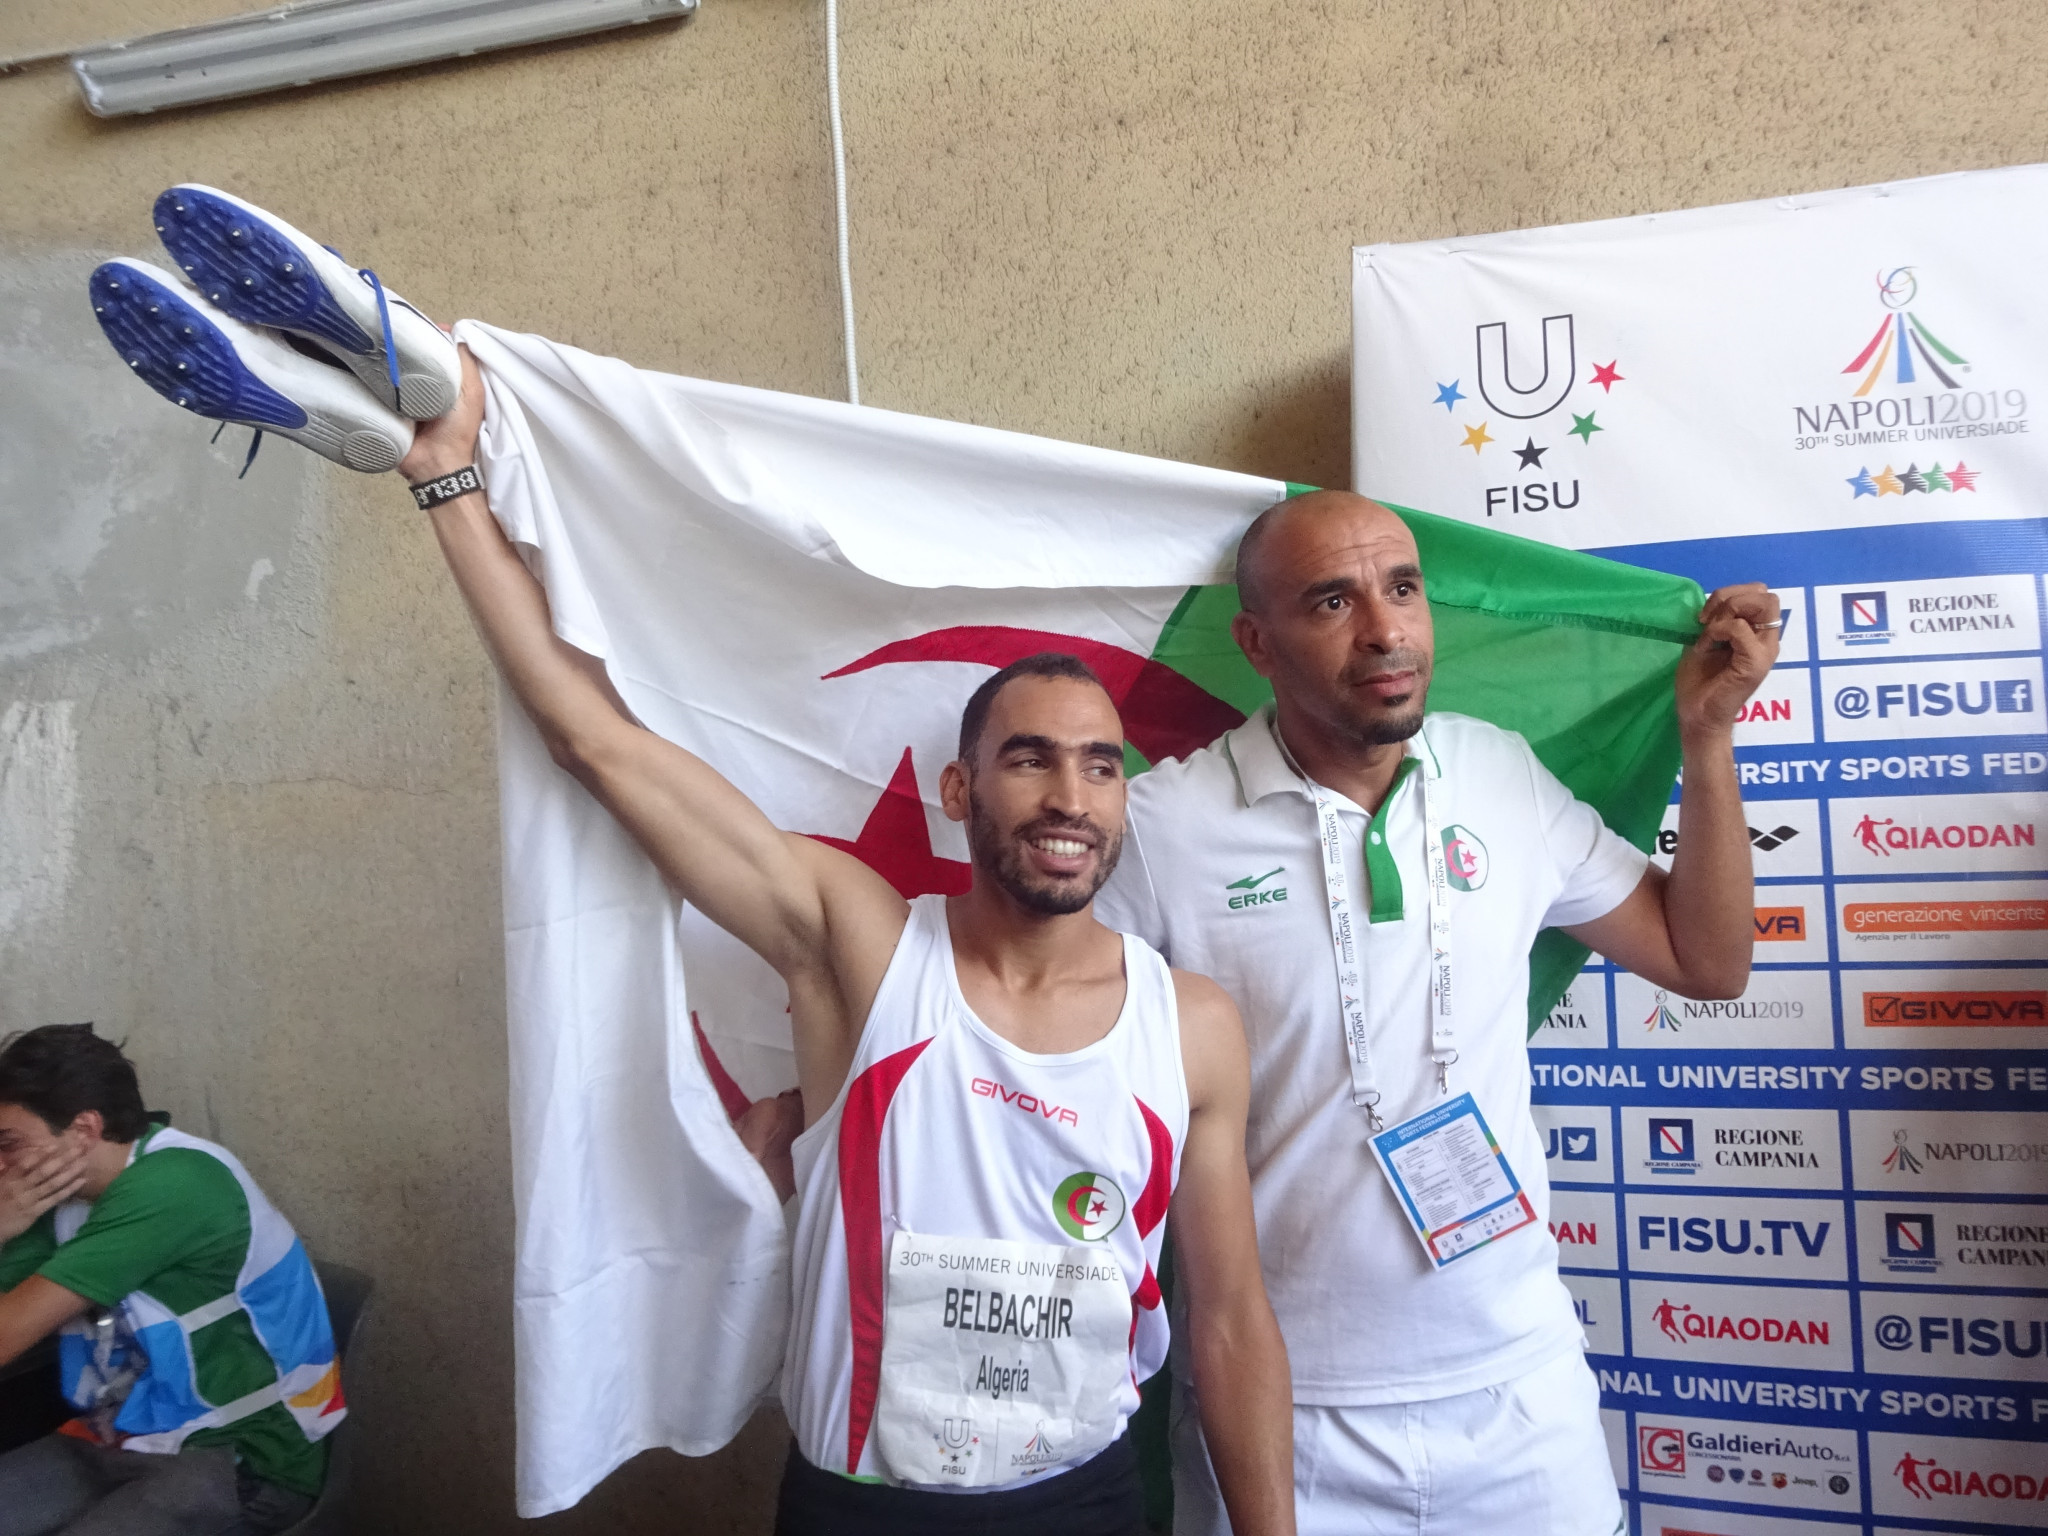 Mohamed Belbachir of Algeria has set his sights on the World Athletics Championships in Doha after claiming Summer Universiade gold in Naples ©Naples 2019 